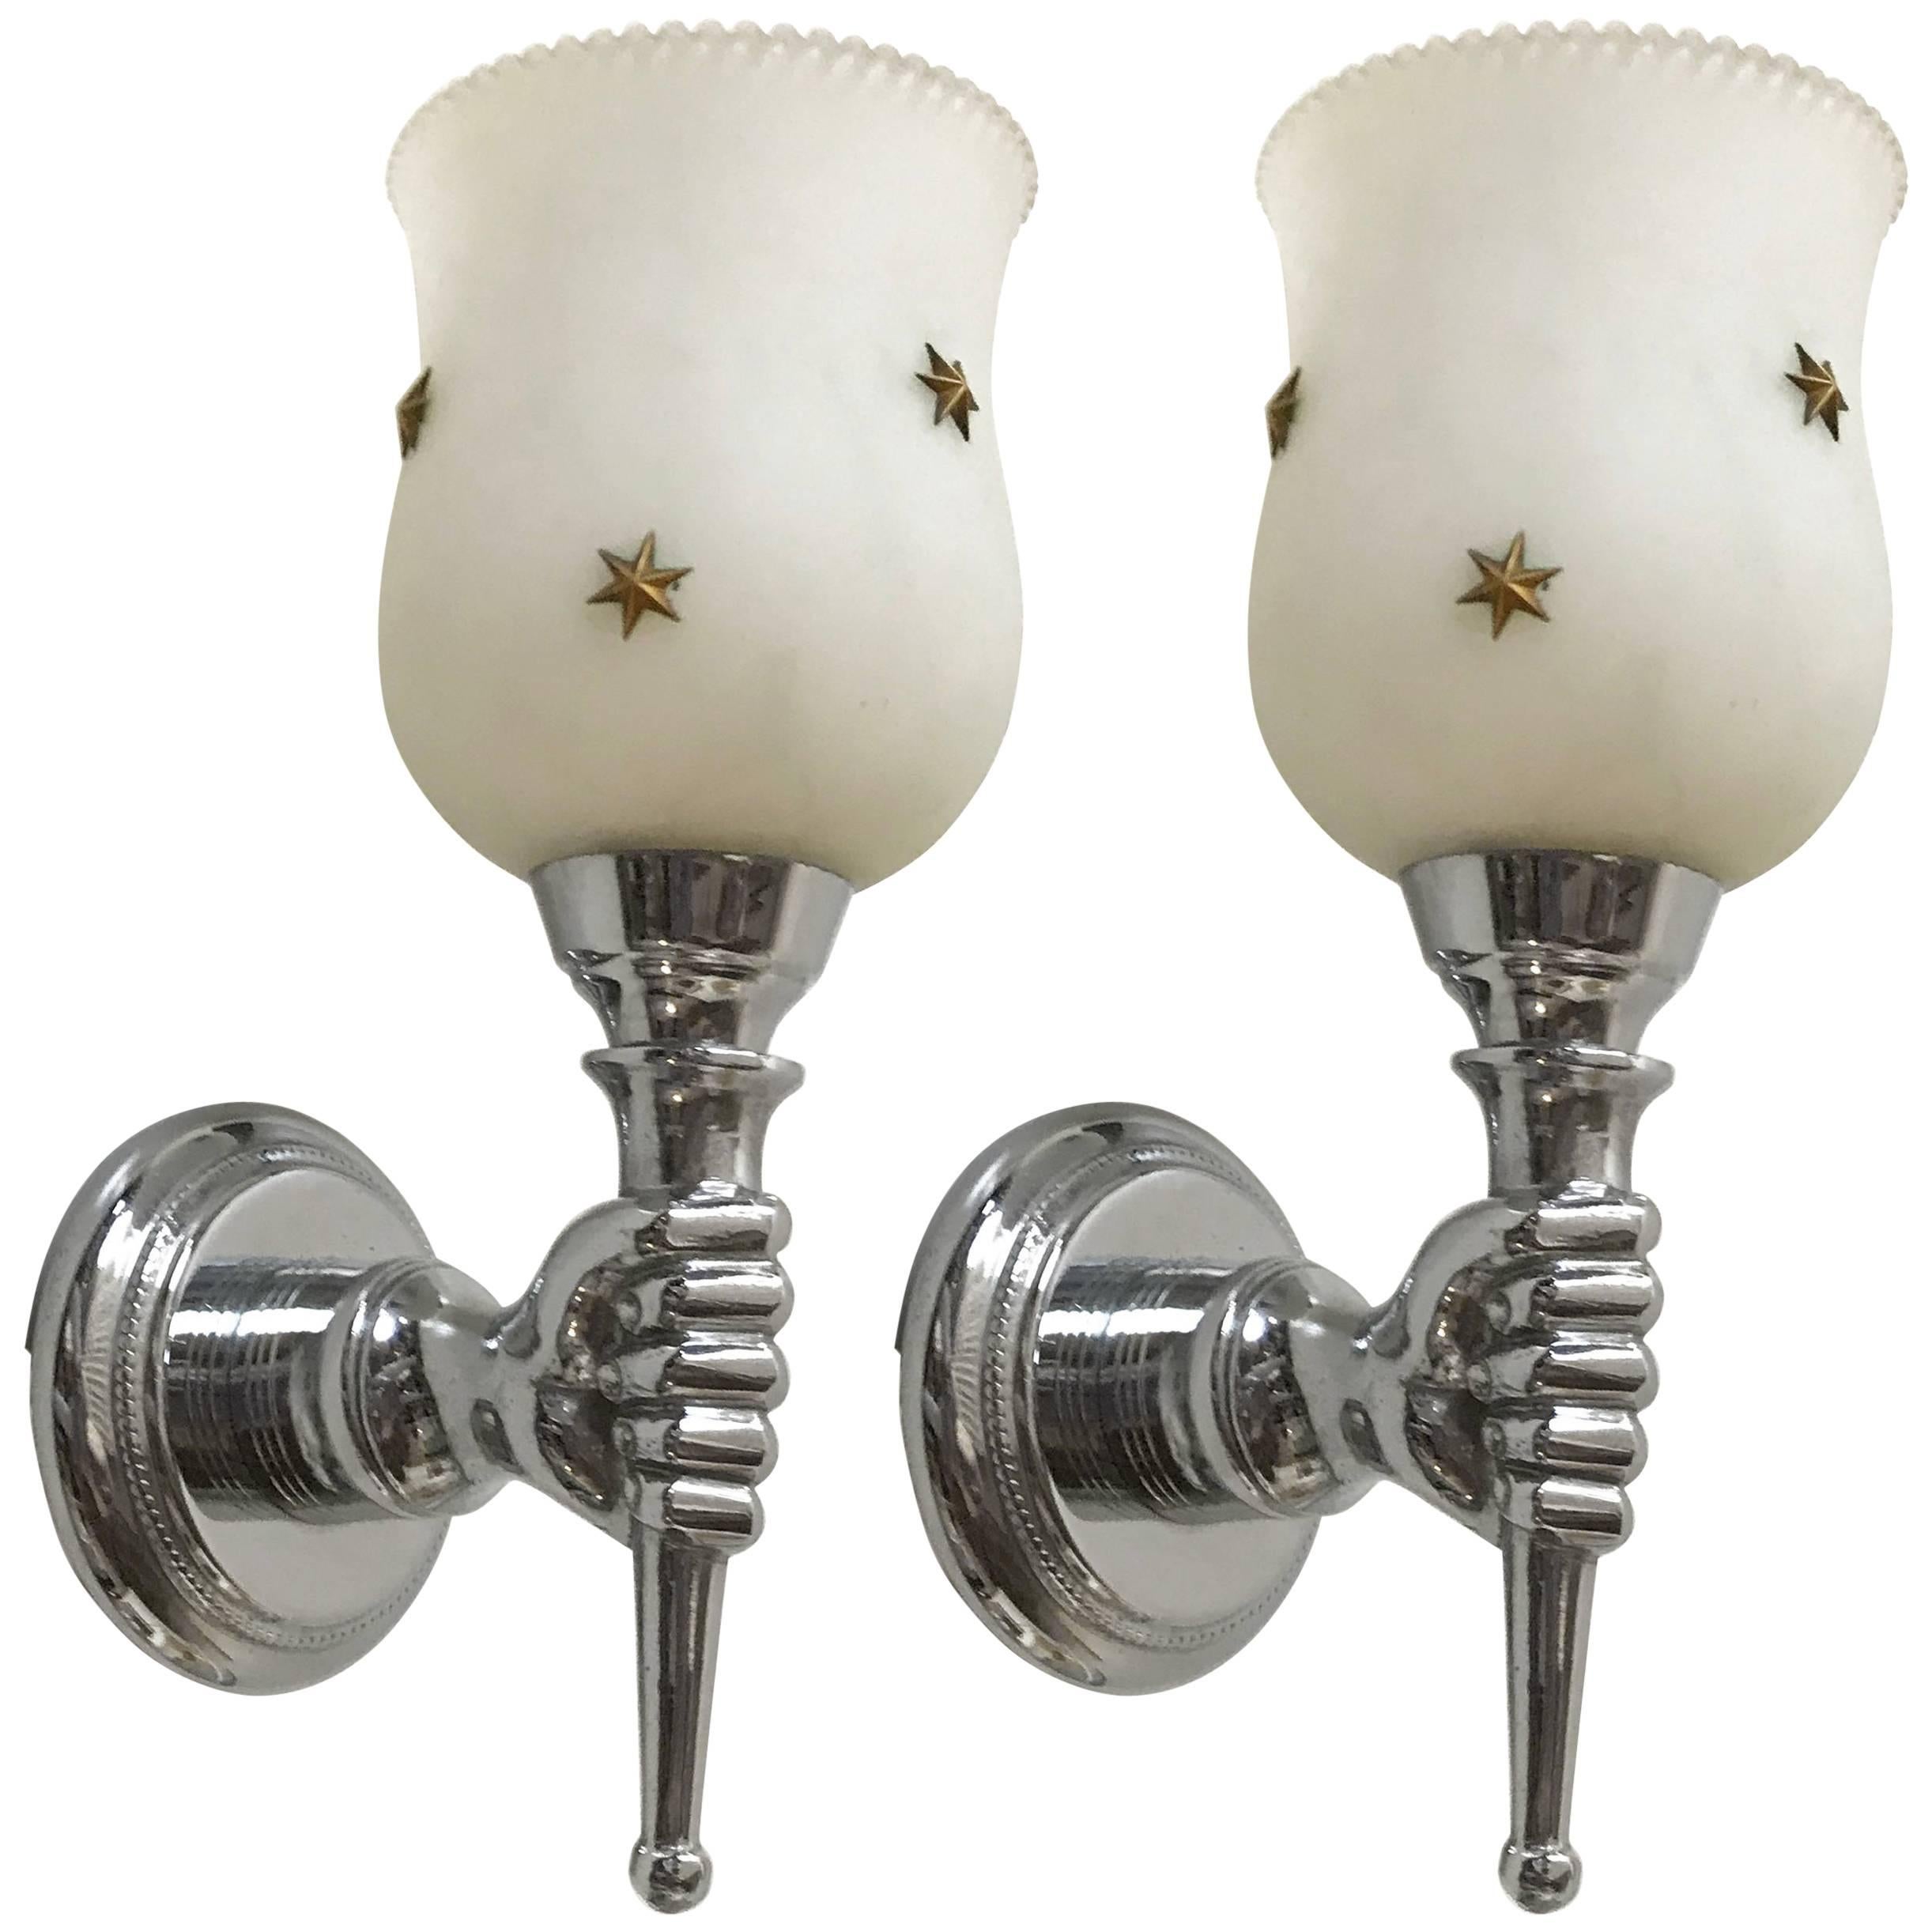 Pair of Andre Arbus Sconces.2 pairs available. Priced by pair.